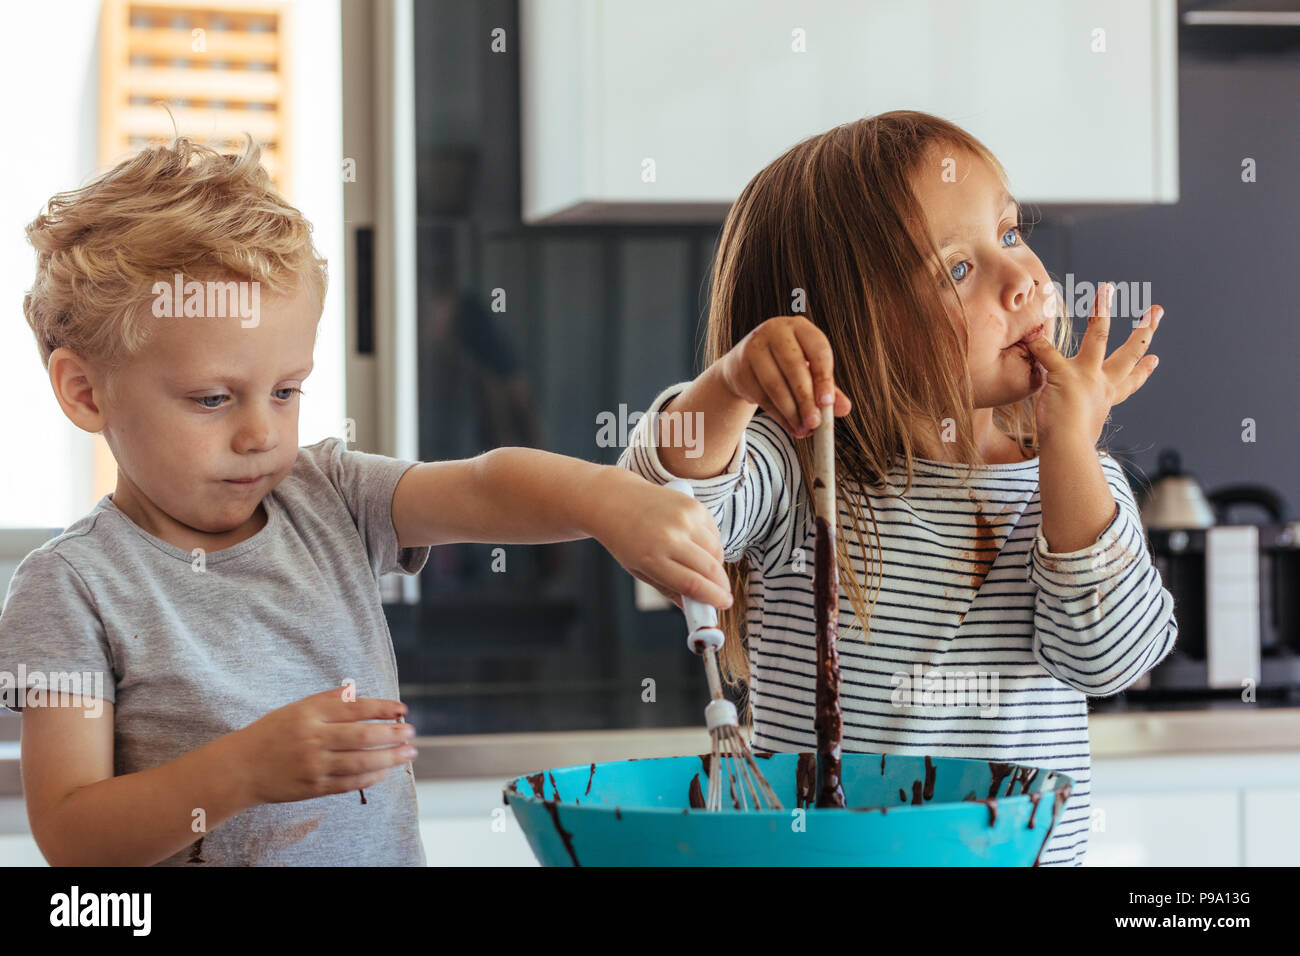 Little Boy And Girl Mixing Batter In A Bowl For Baking With Girl Licking Her Fingers Small Kids Baking In The Kitchen Stock Photo Alamy